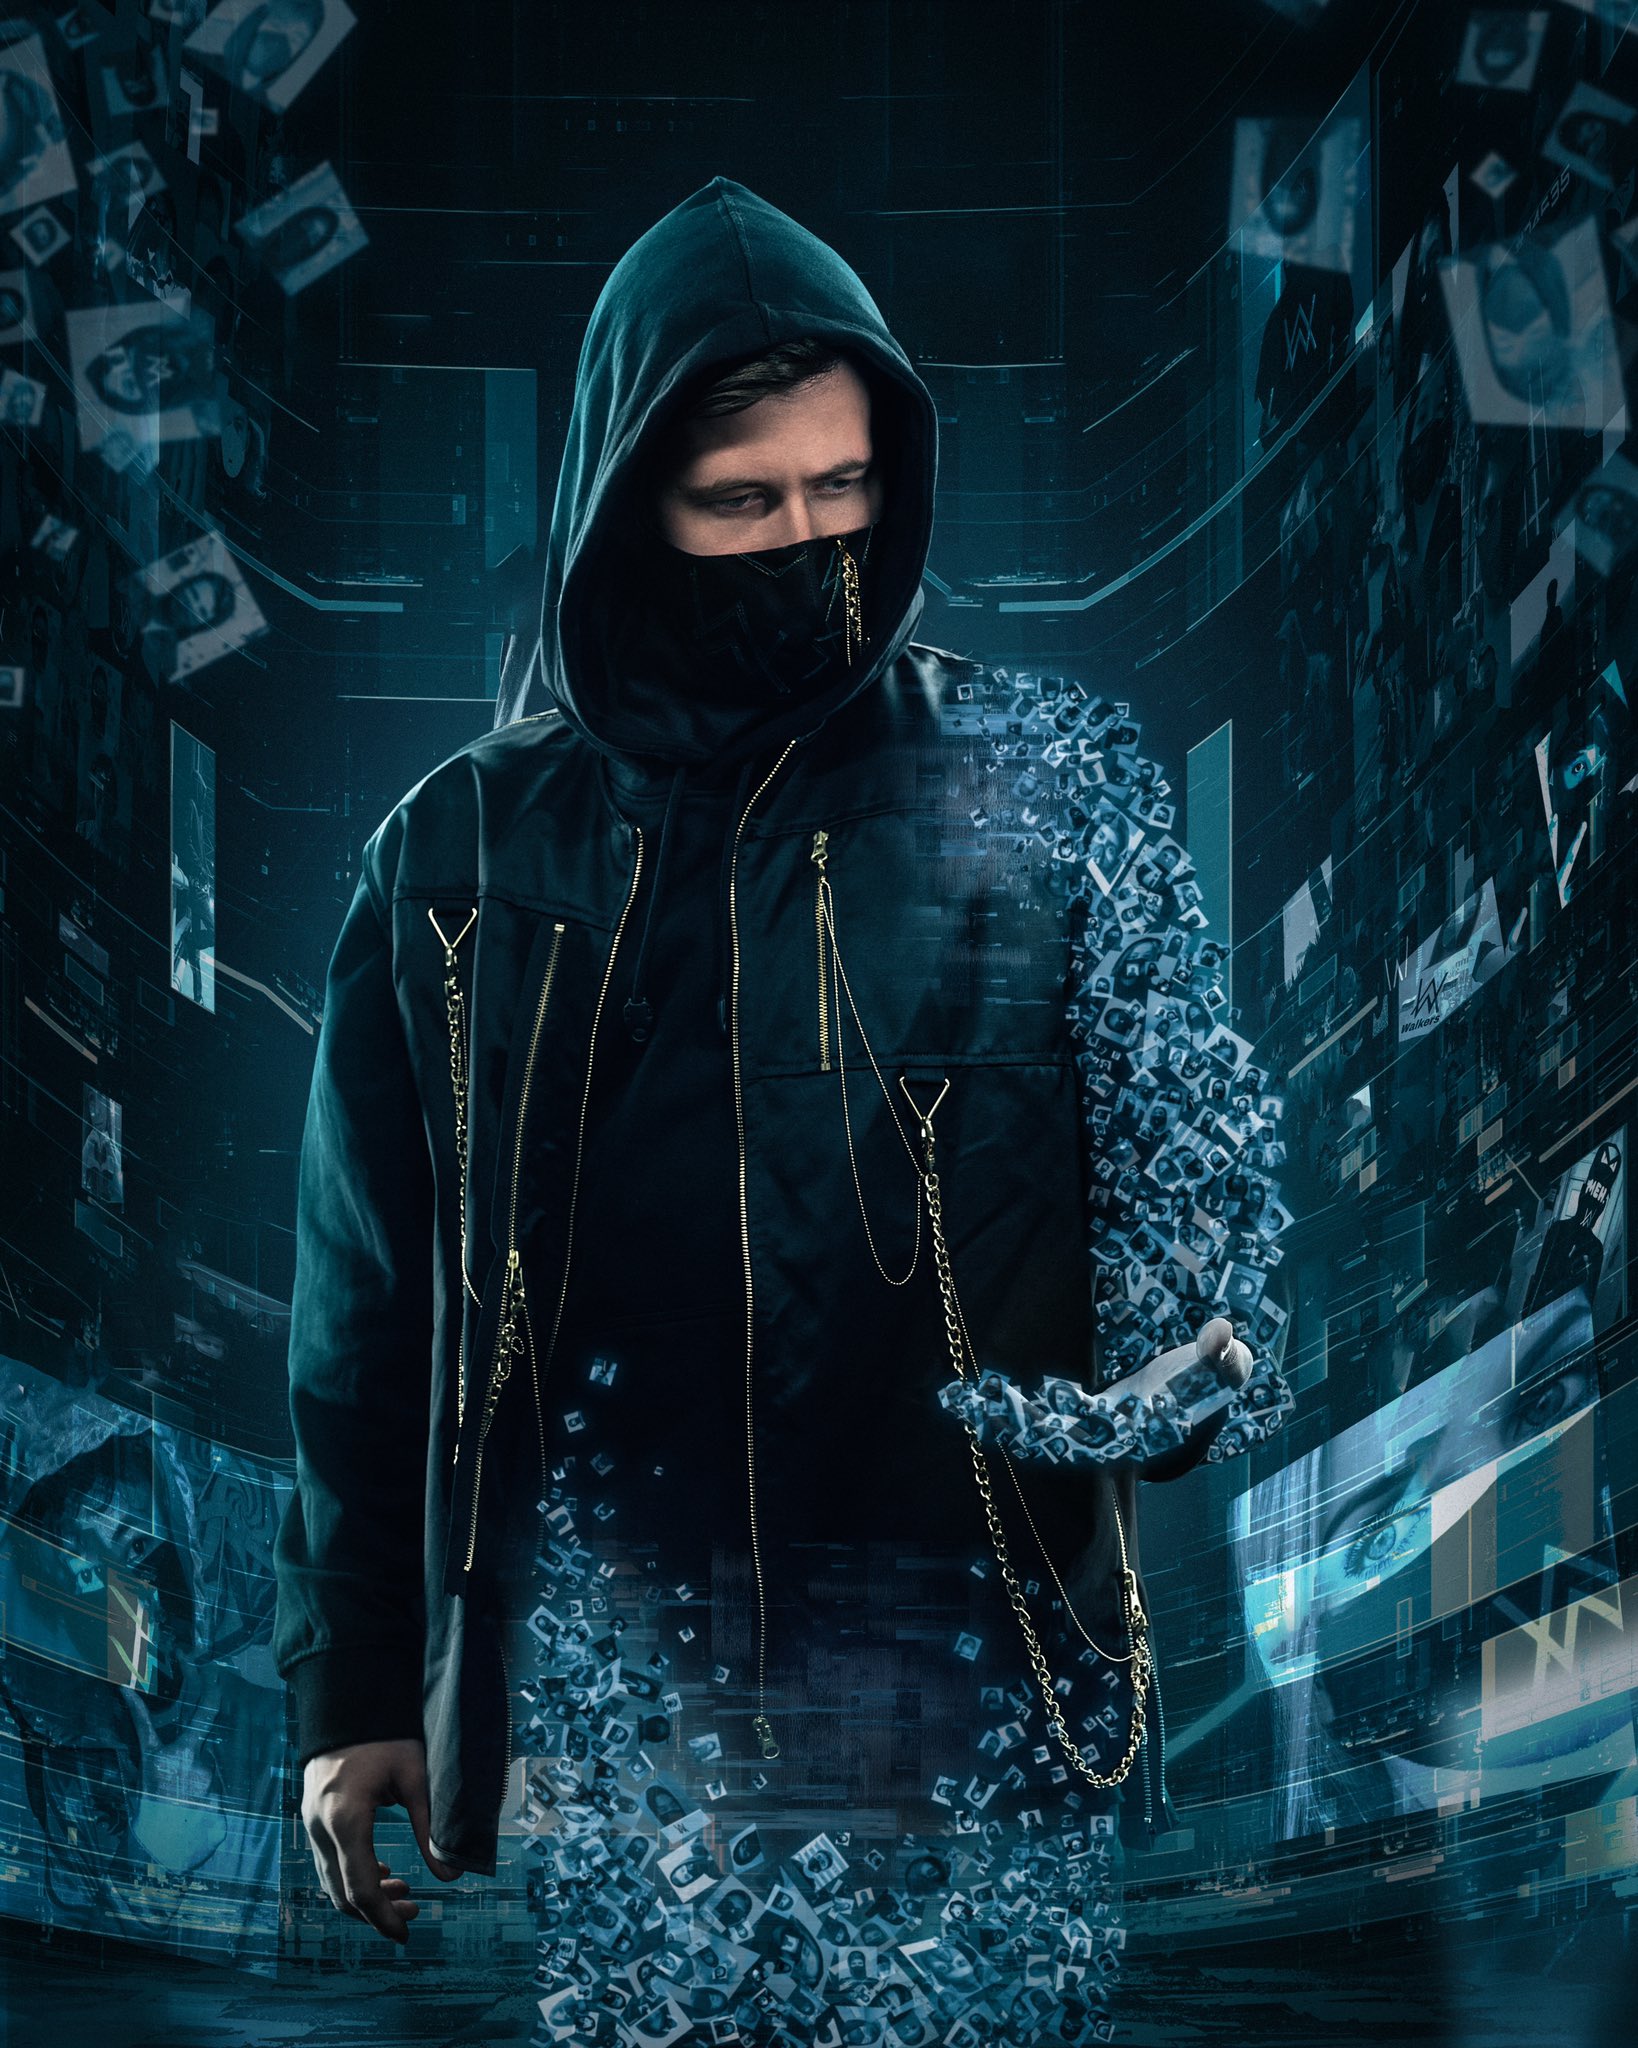 Alan Walker on Twitter: "ONLY 3 DAYS! Join the countdown and presave the  album to unlock the artwork 🔑 so happy to have made this cover with you,  around 15K people participated!